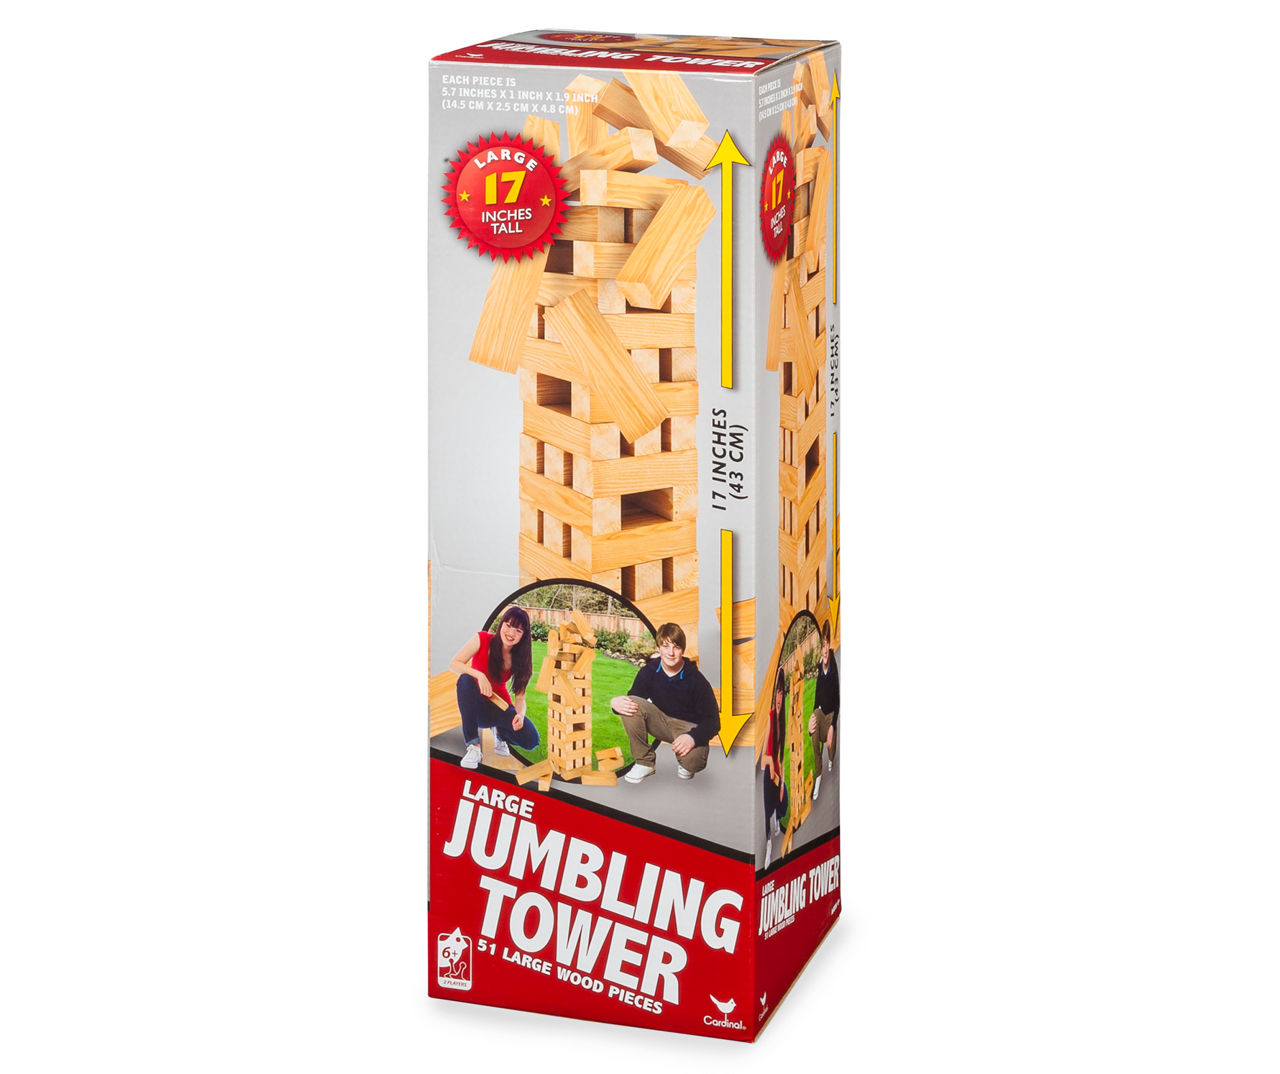 Giant Jumbling Tower Party Game with 51 Wood Blocks for Families & Ages 6 and up 